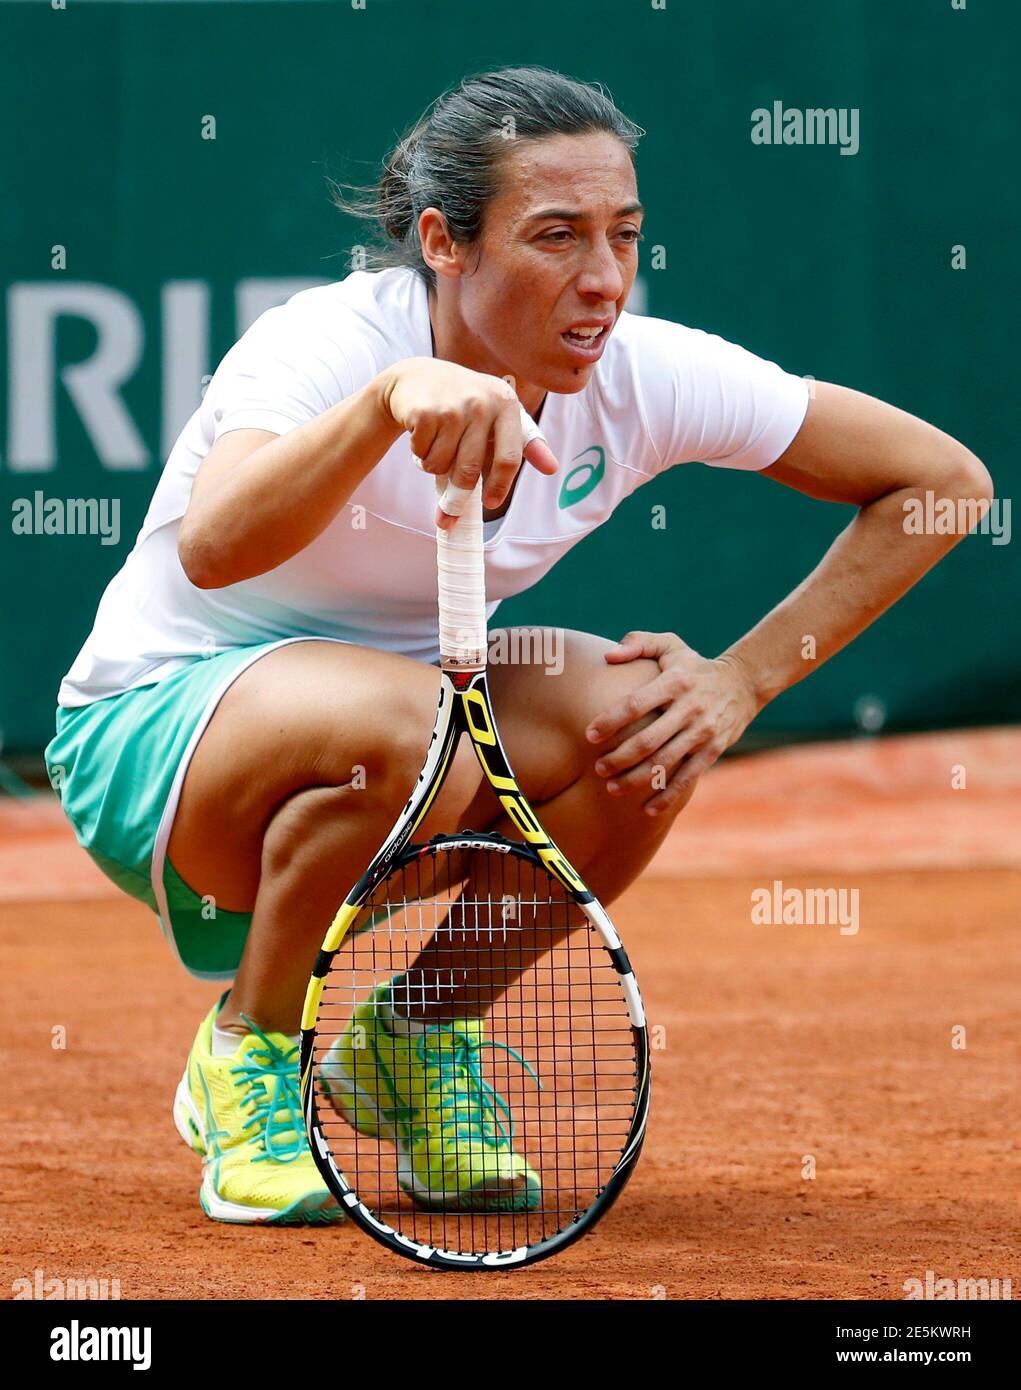 Francesca Schiavone of Italy reacts during the women's singles match  against Andreea Mitu of the Romania at the French Open tennis tournament at  the Roland Garros stadium in Paris, France, May 30,